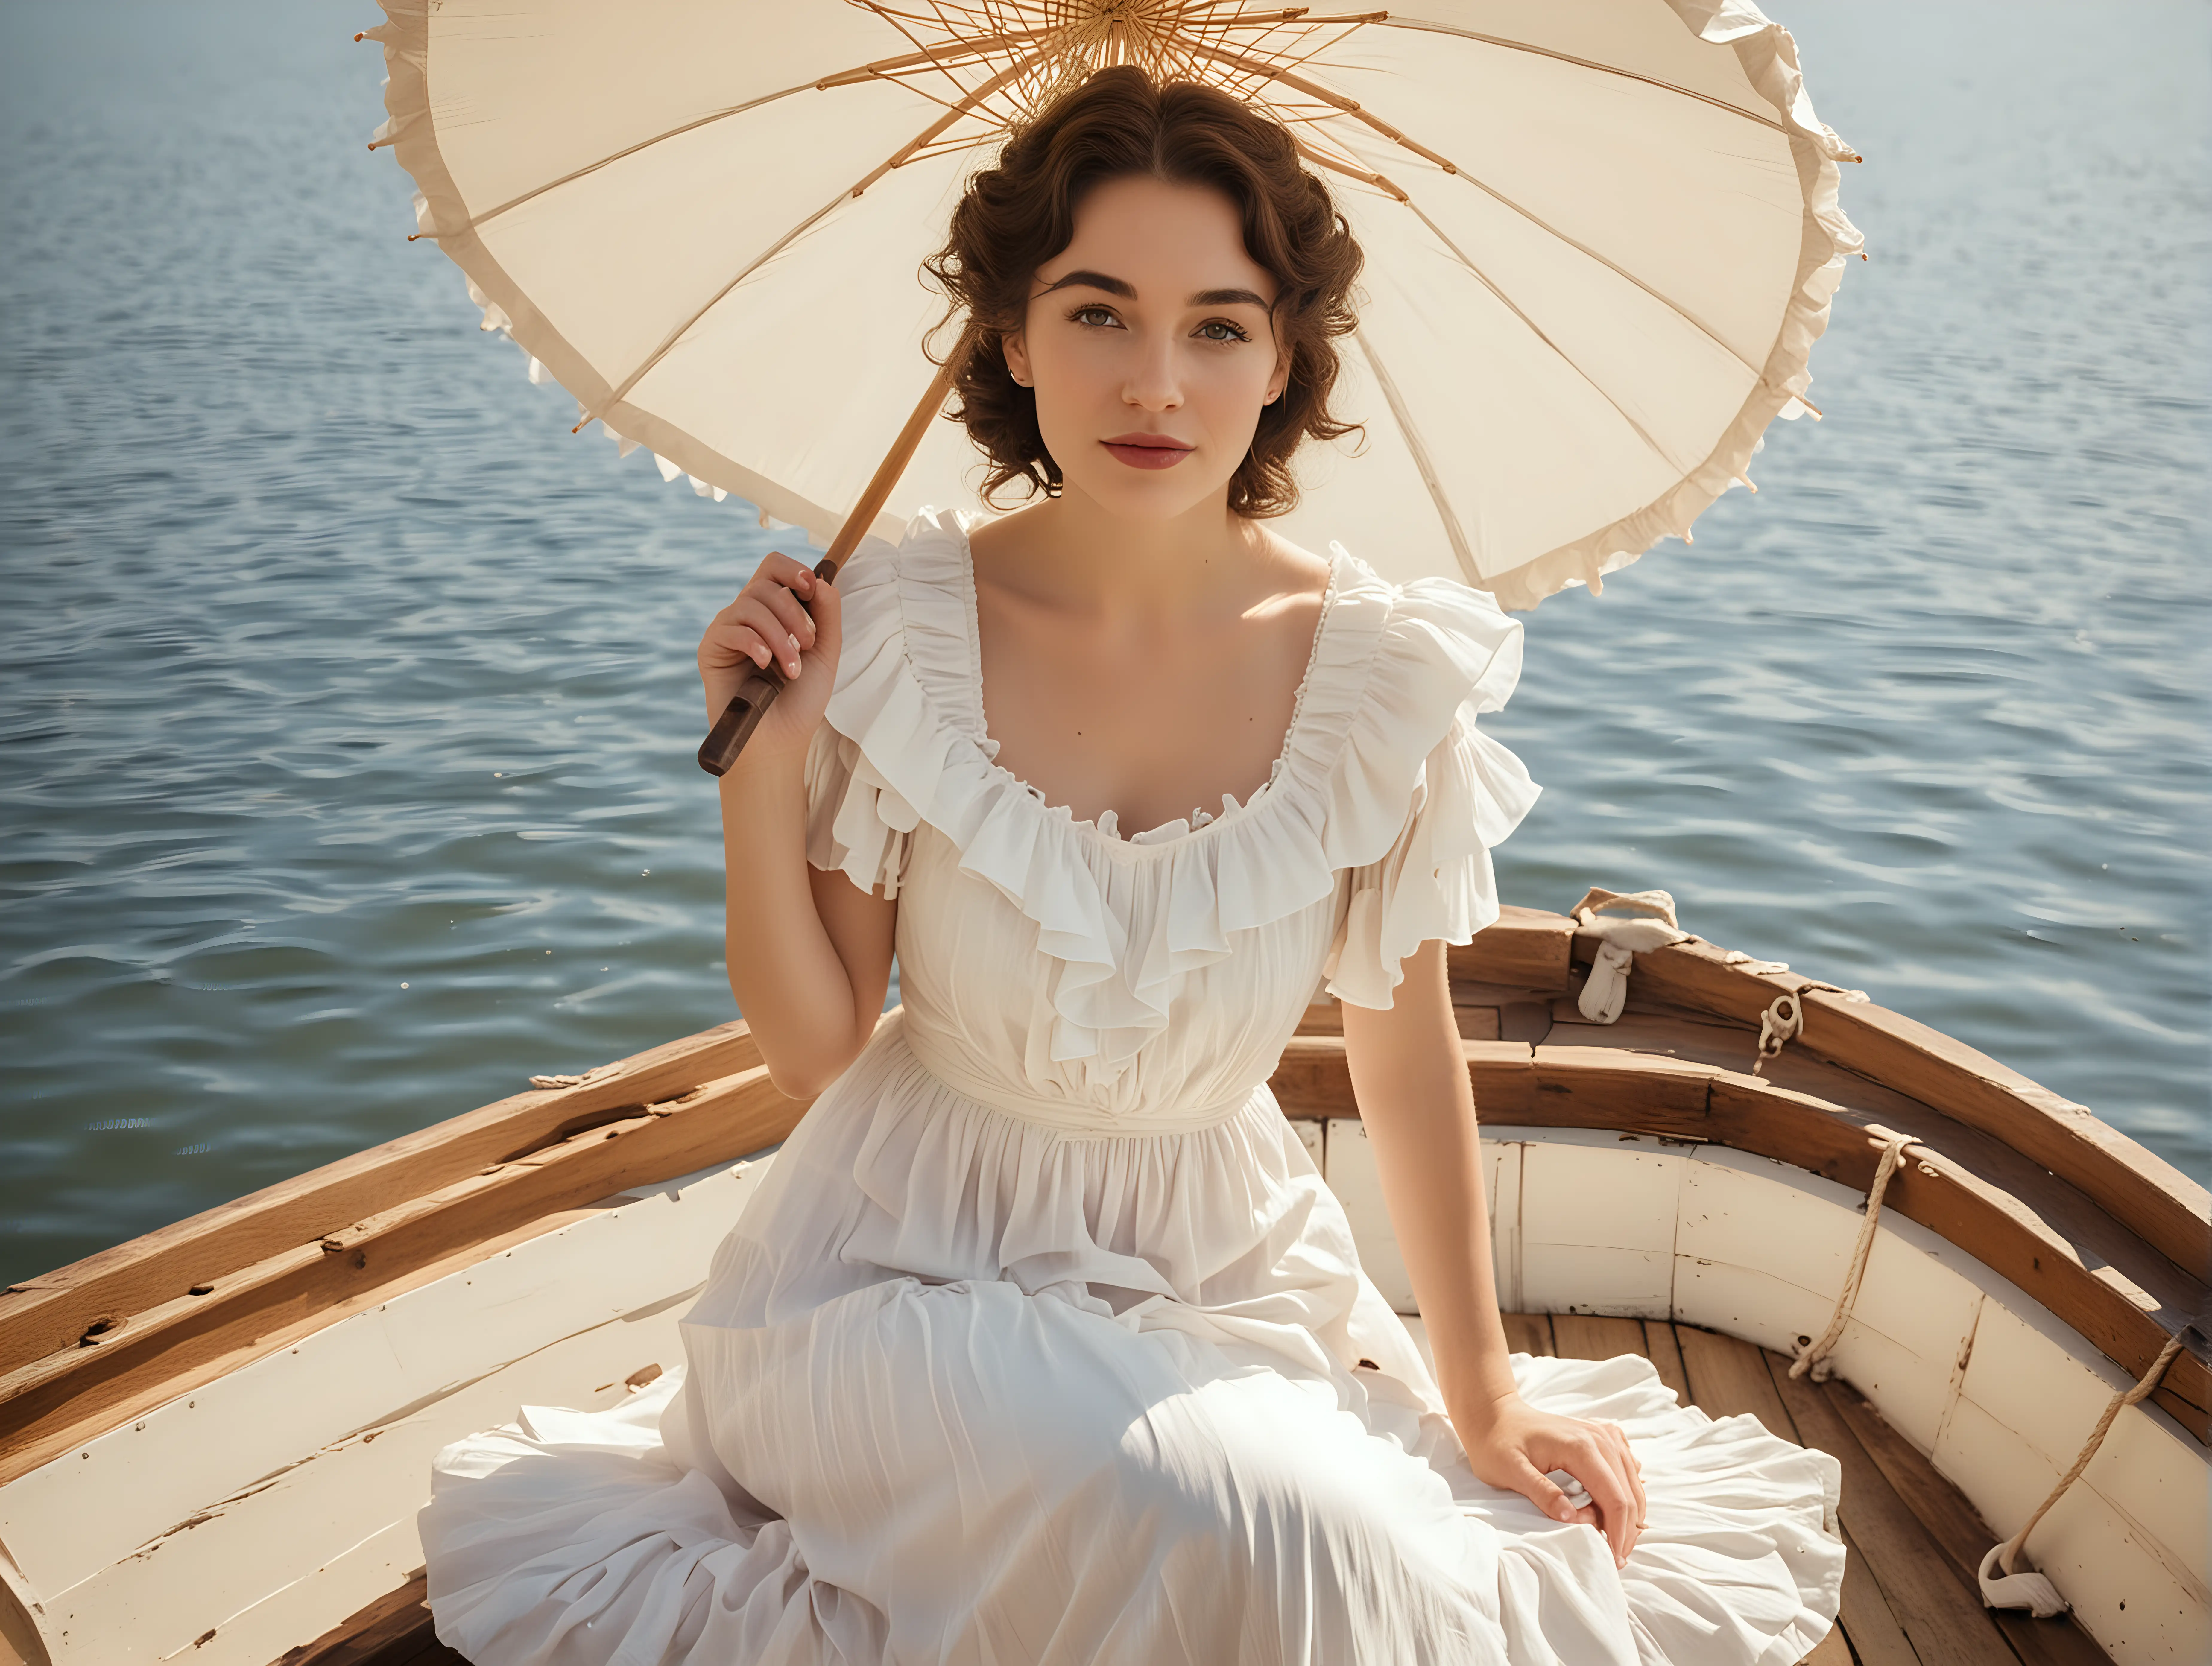 1930s Style Woman in White Dress with Parasol Sitting in Wooden Boat on Sunny Day